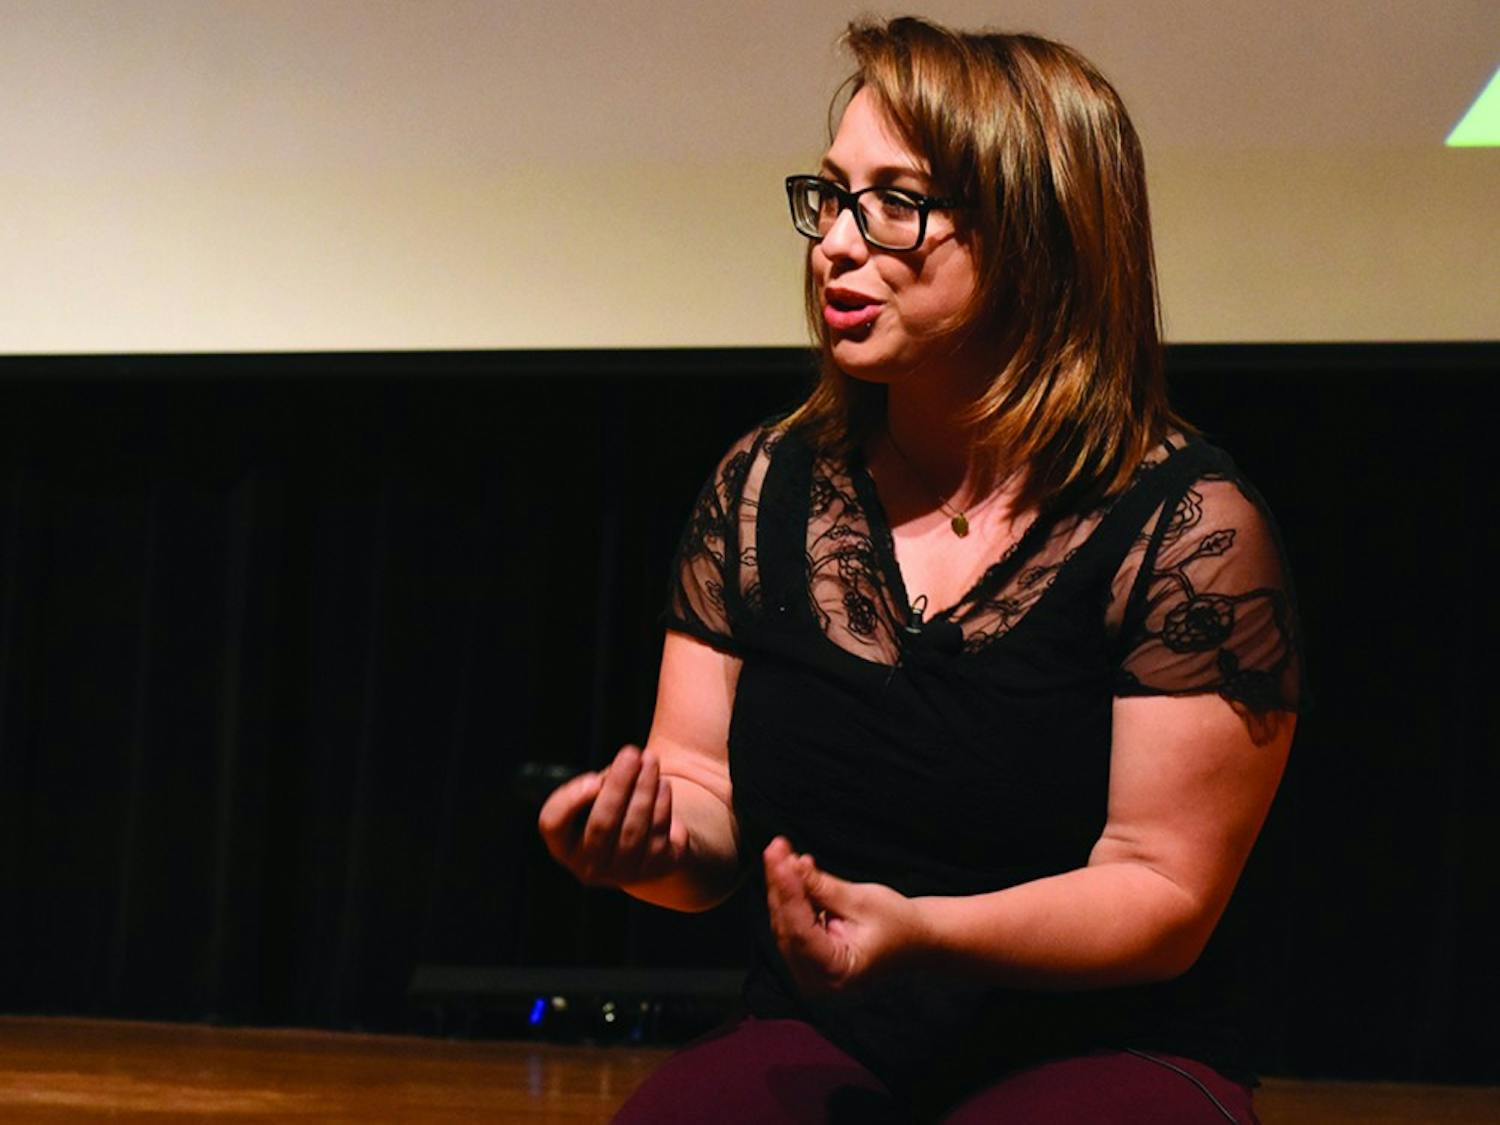 Laci Green gave a talk in the Great Hall about taking down rape culture on April 4th. The talk was&nbsp;presented by Delta Advocates.